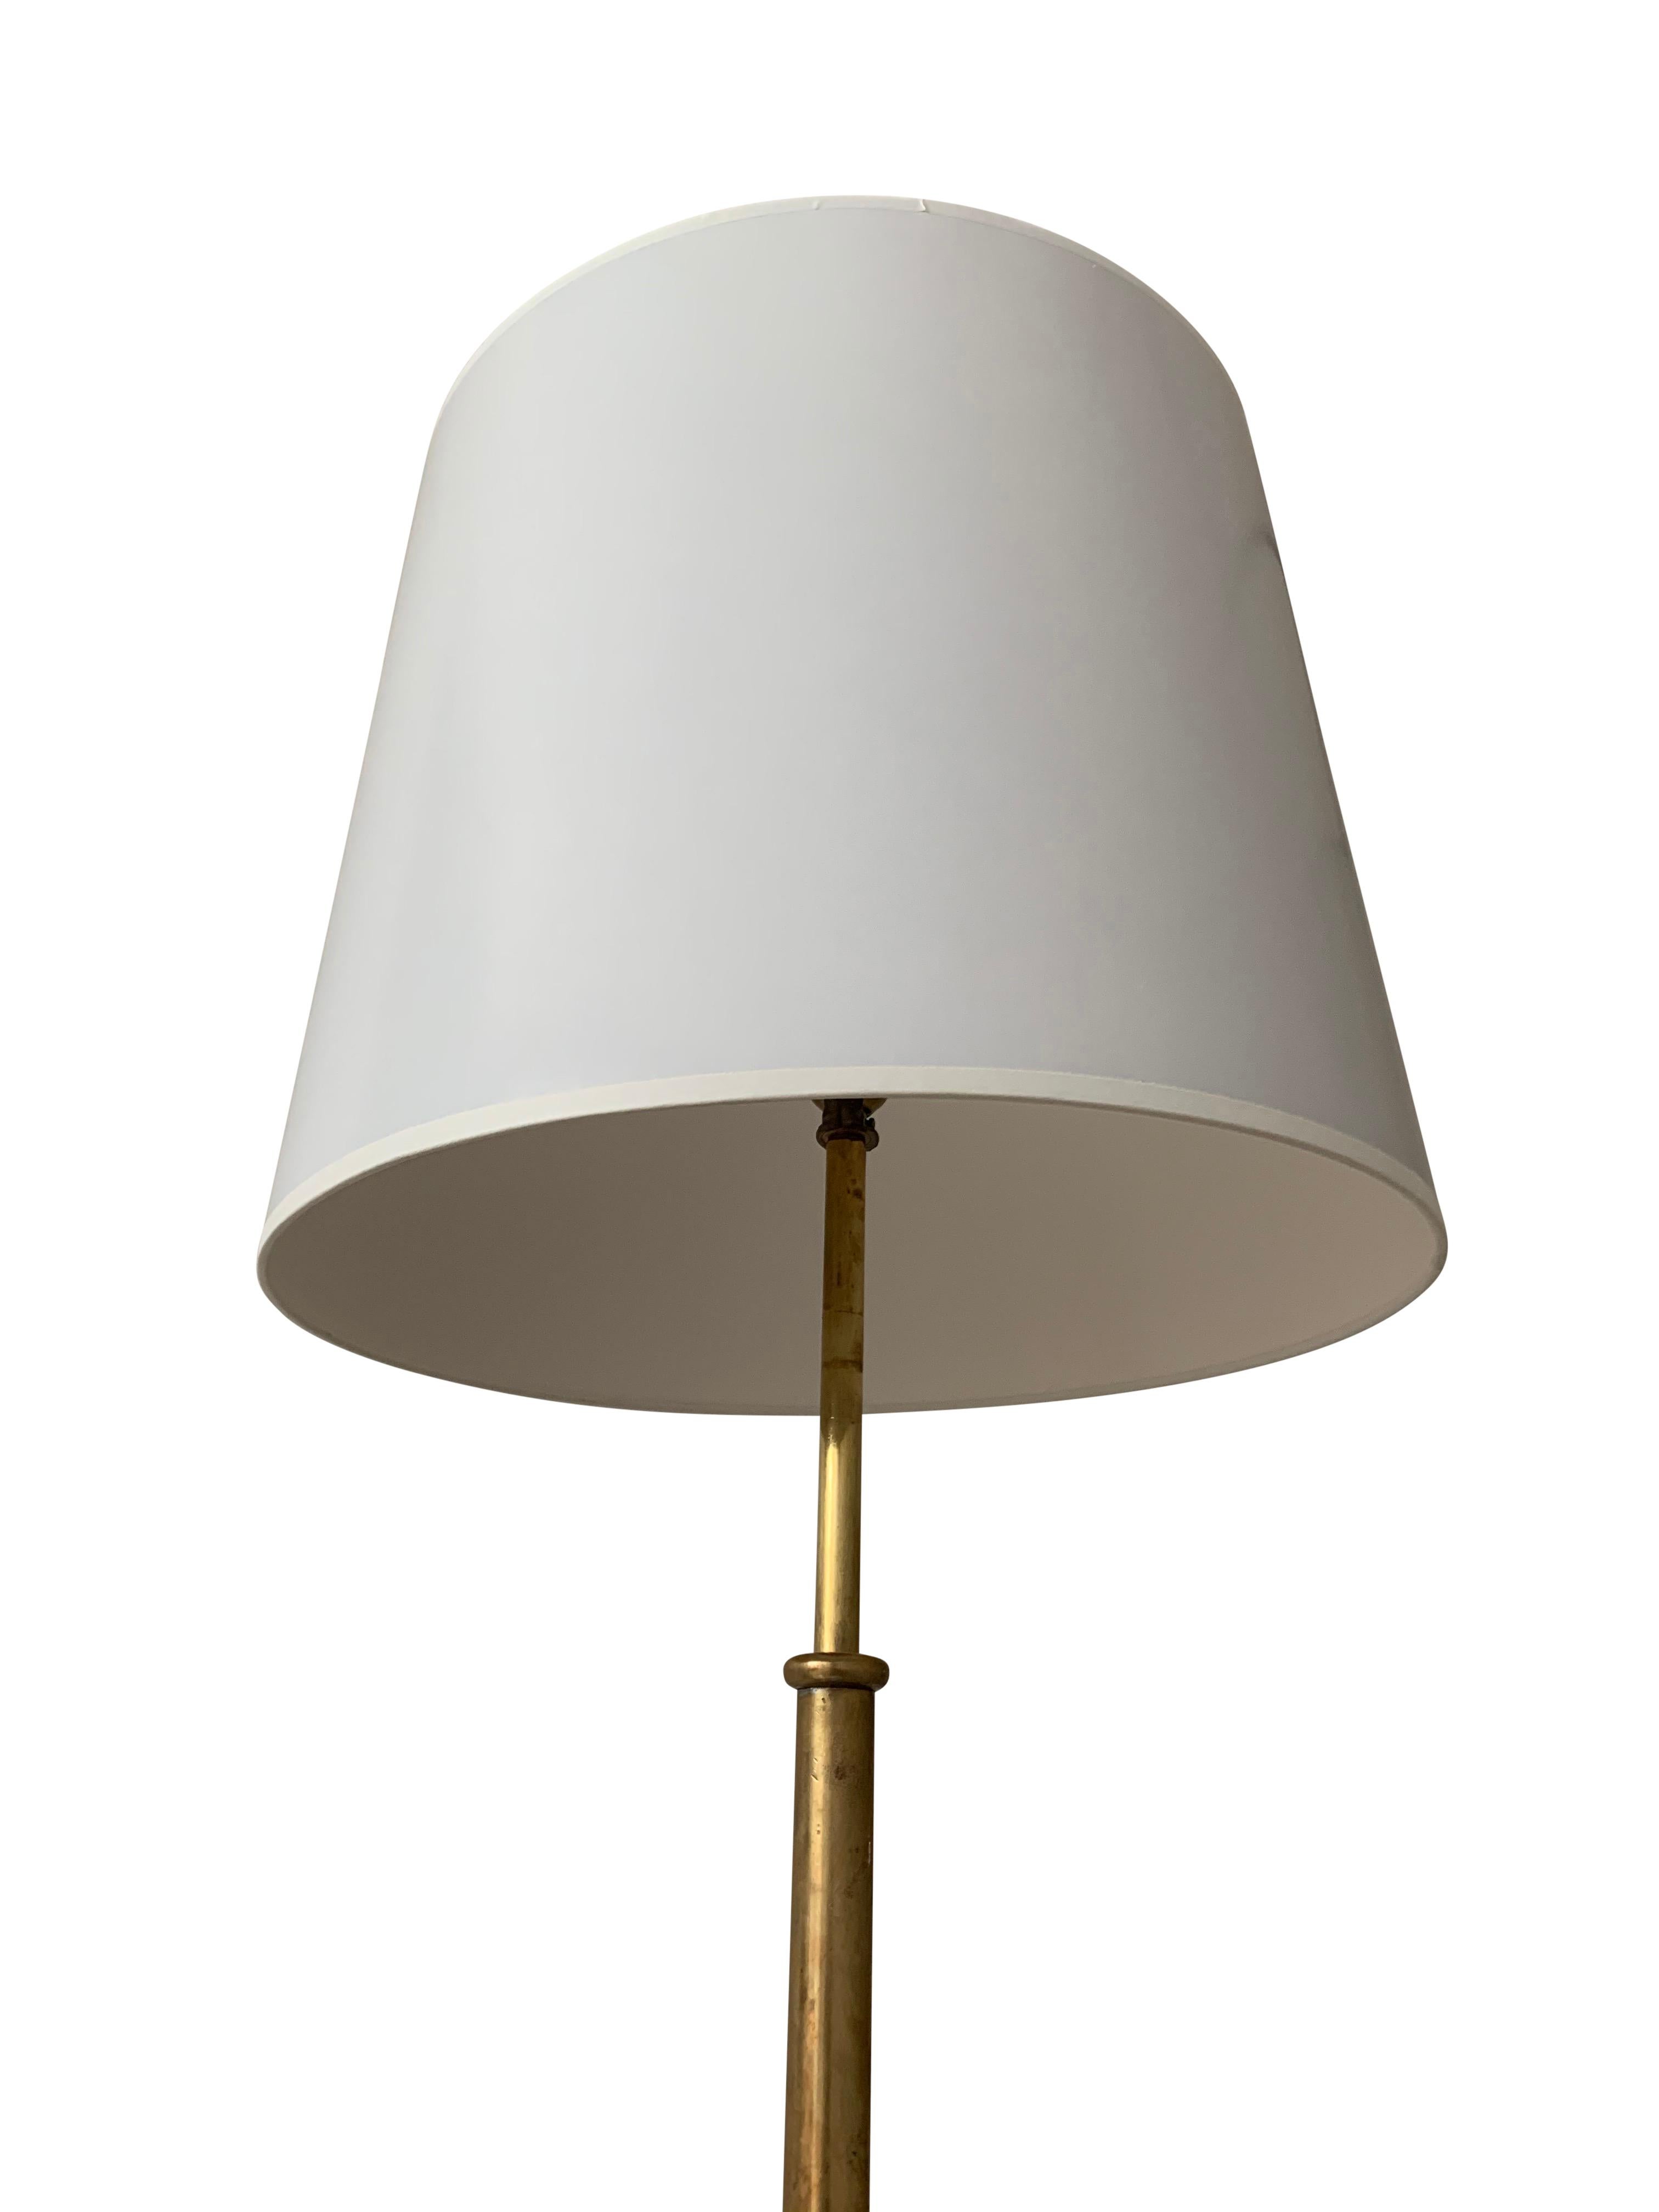 Danish Mid-Century Modern ceramic floor lamp, brass and fabric. Made in 1960s. Brand new high end screen.